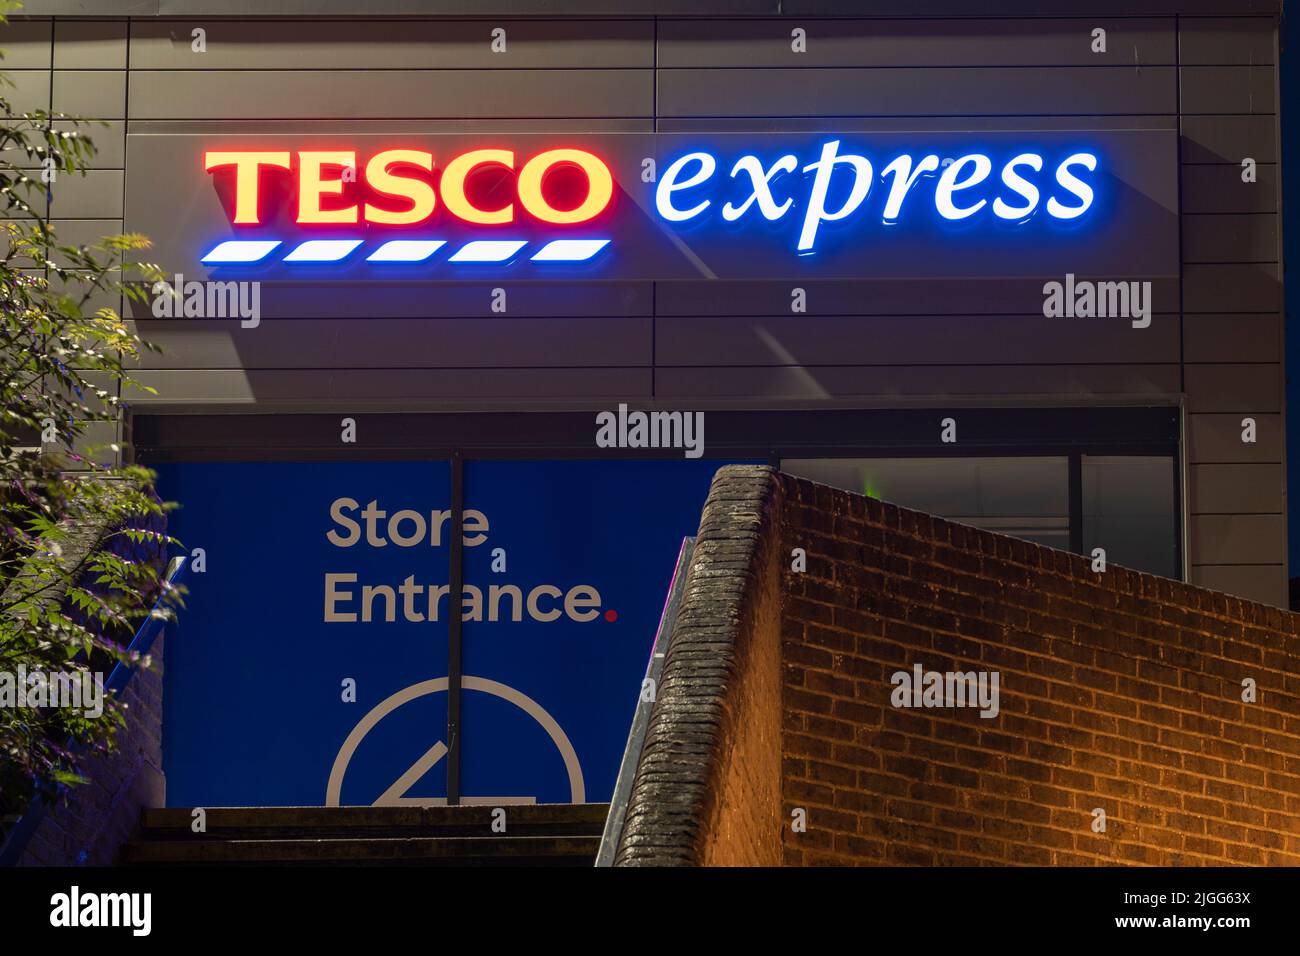 Tesco Express - a small grocery supermarket - logo and sign illuminated at night in The Malls shopping centre in Basingstoke town centre. England, UK Stock Photo